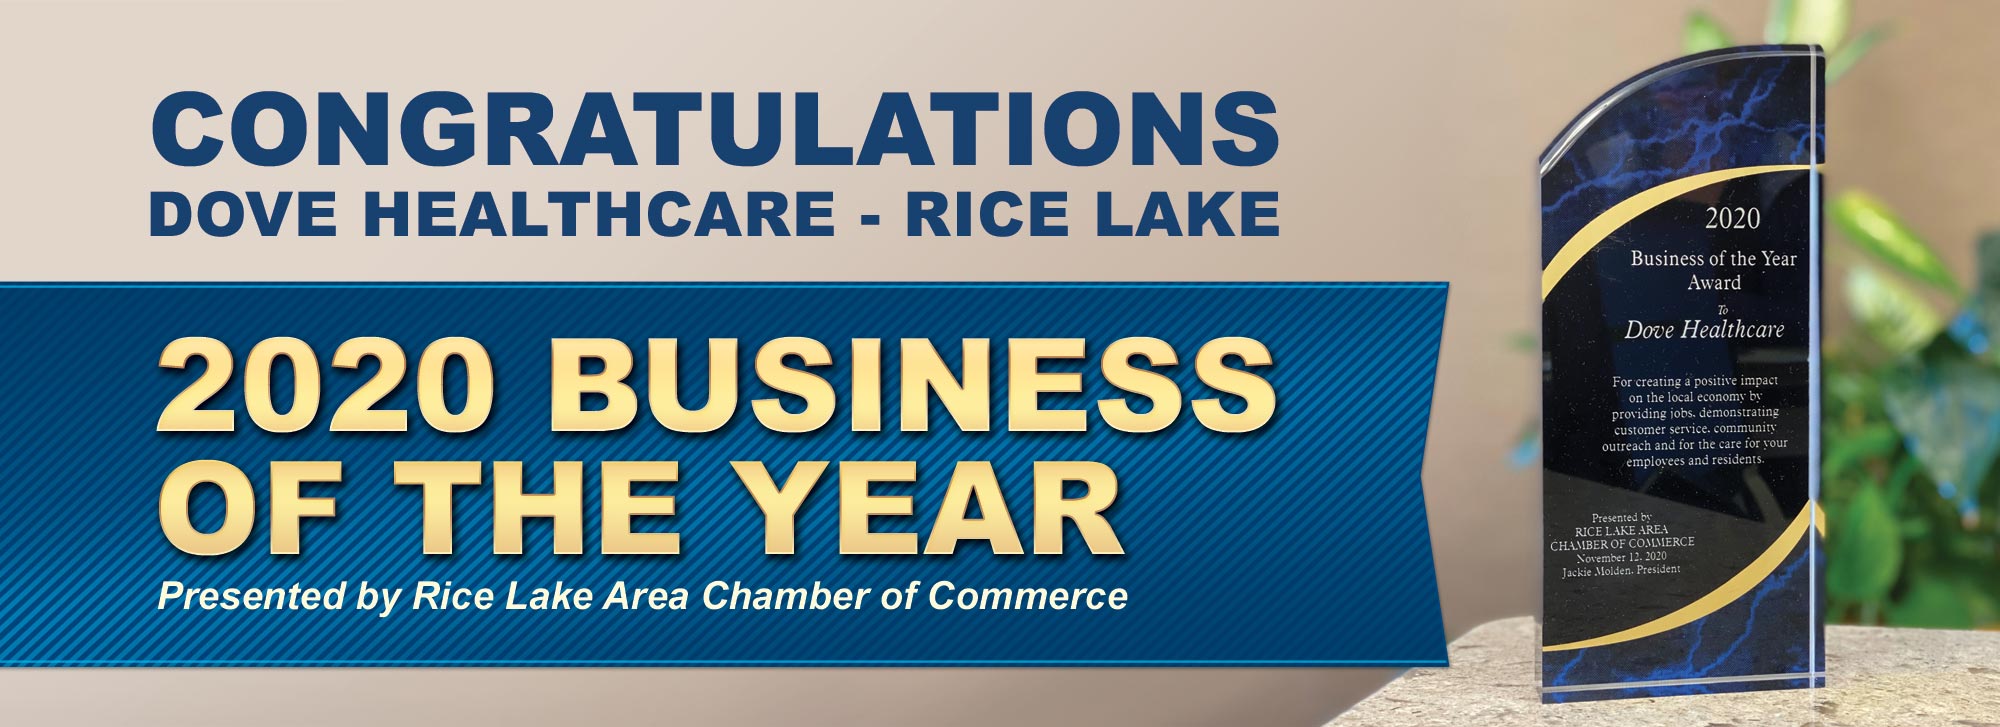 Rice Lake Business of the Year